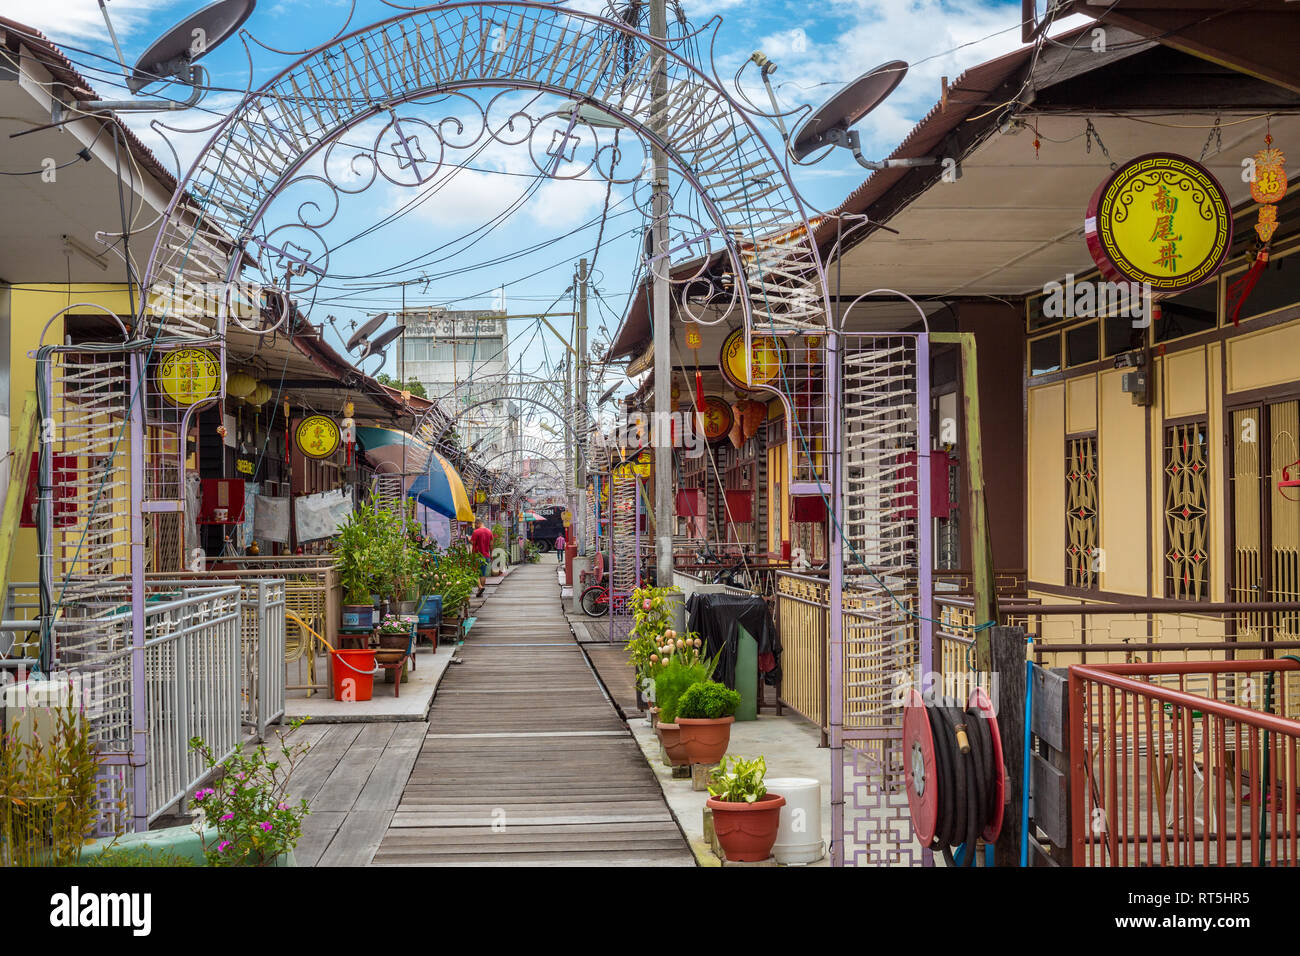 Street Scene and Houses, Lee Clan Jetty, George Town, Penang, Malaysia Stock Photo